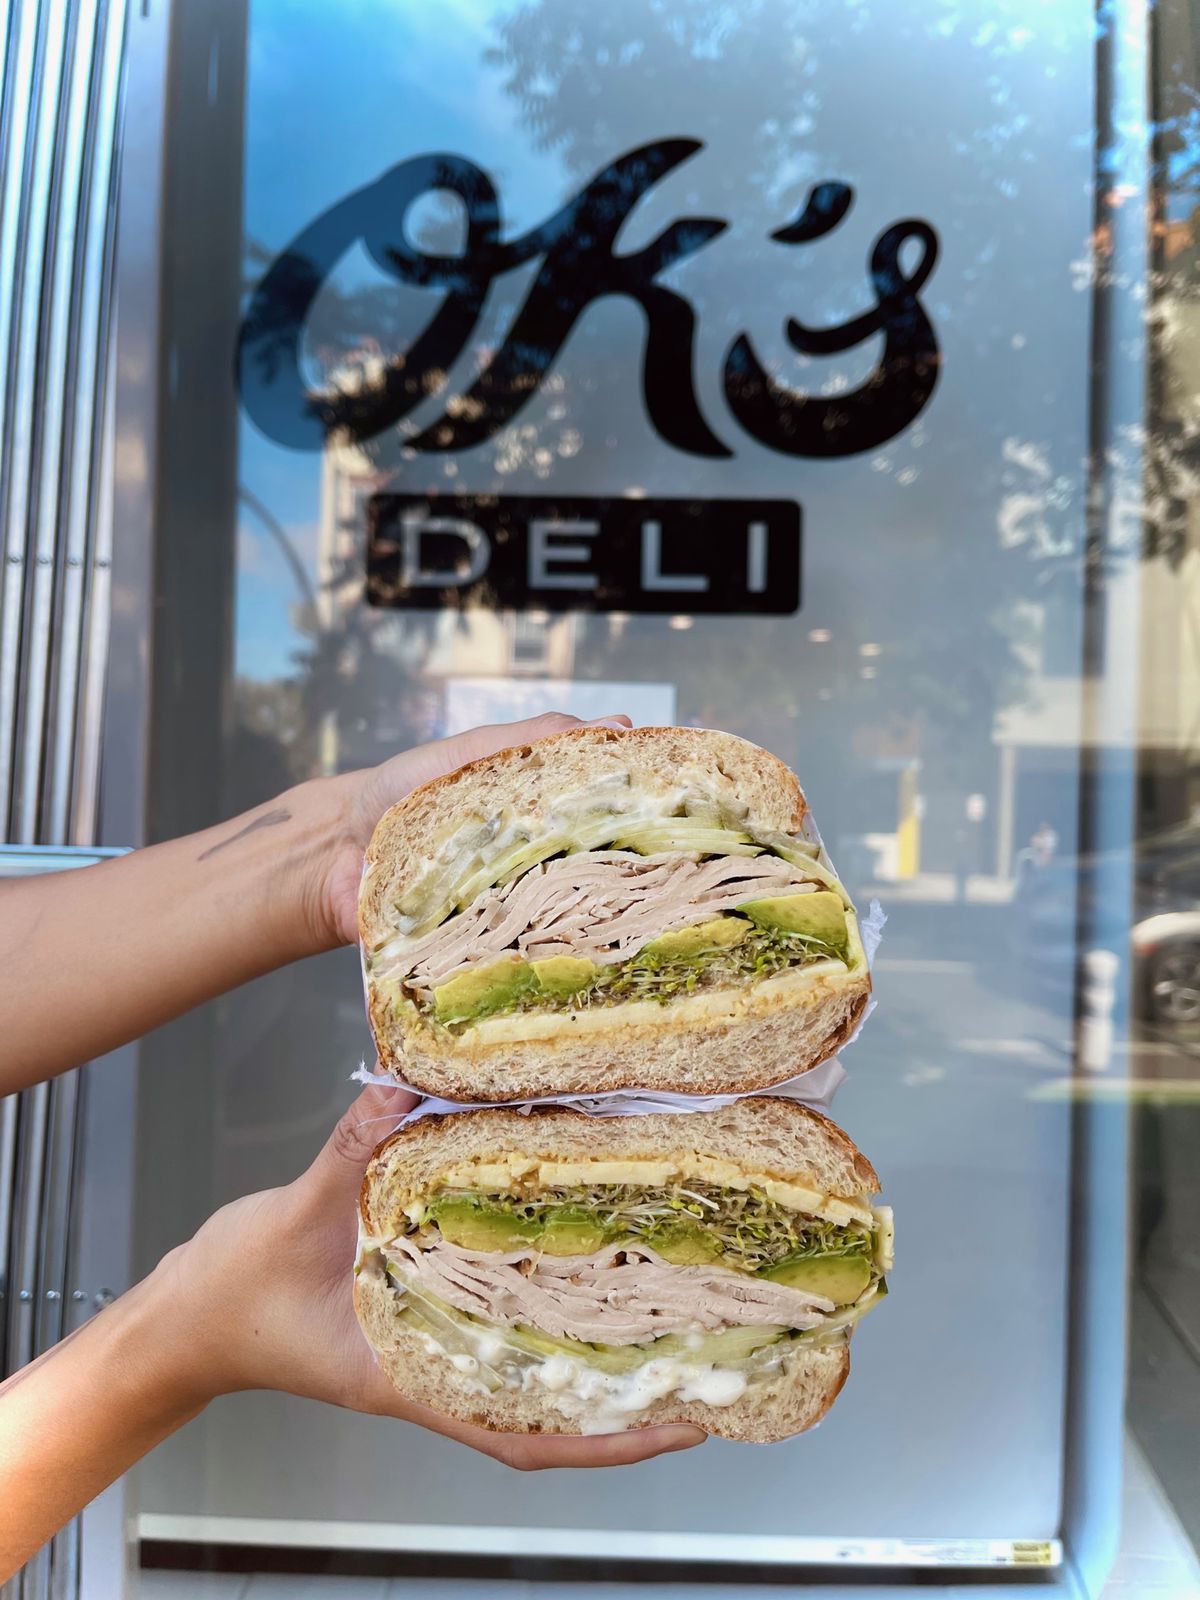 A bisected sandwich is shown in front of the entrance to Ok’s Deli in Oakland.